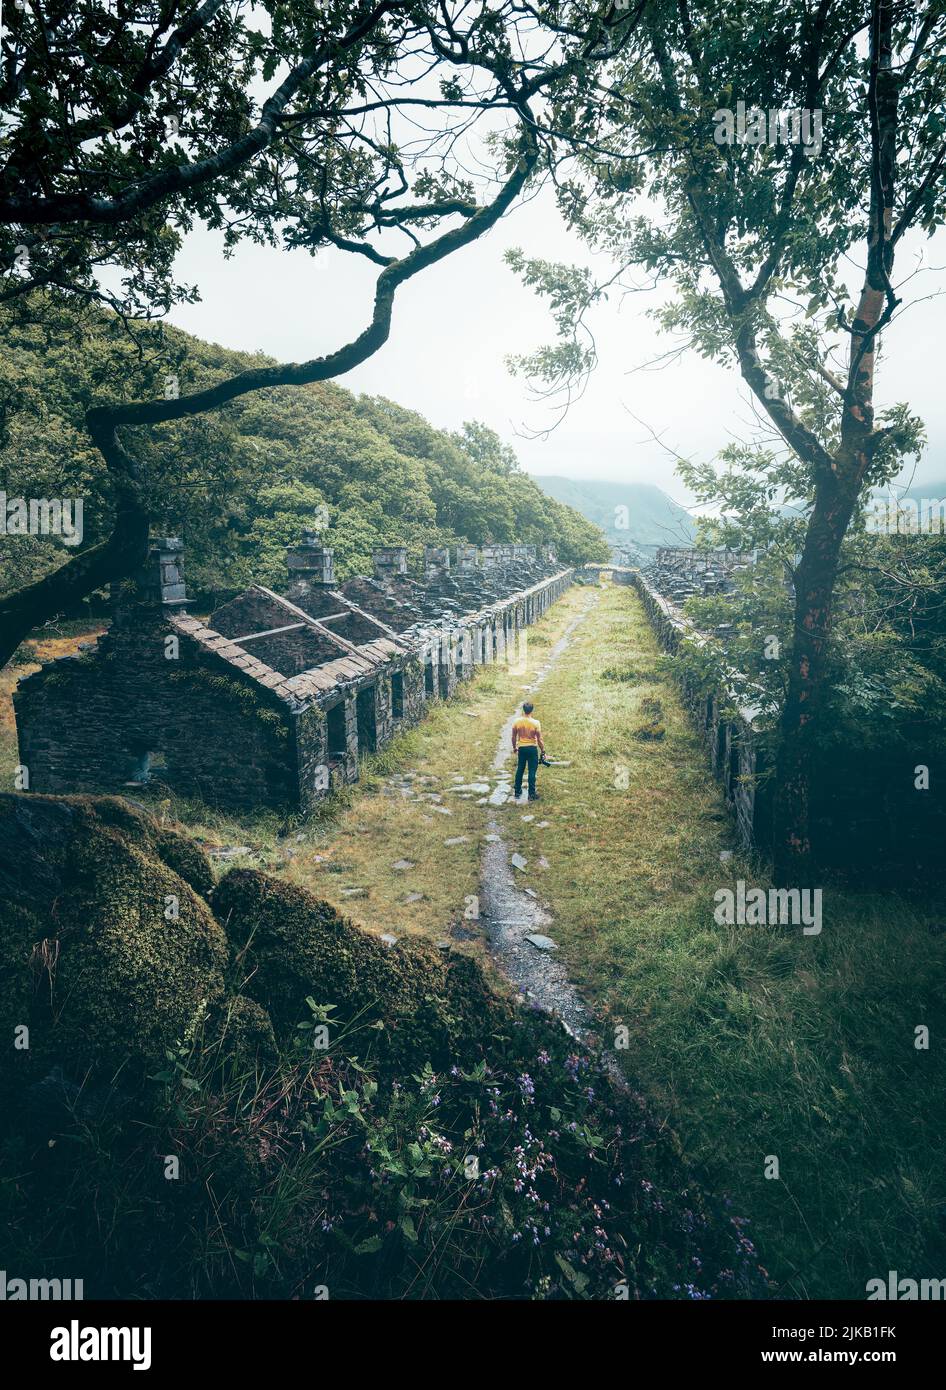 Slate Quarry Barracks, an abandoned area set in the mountains. UK: THESE STUNNING images of a lone traveller crossing incredible landscapes prove how Stock Photo